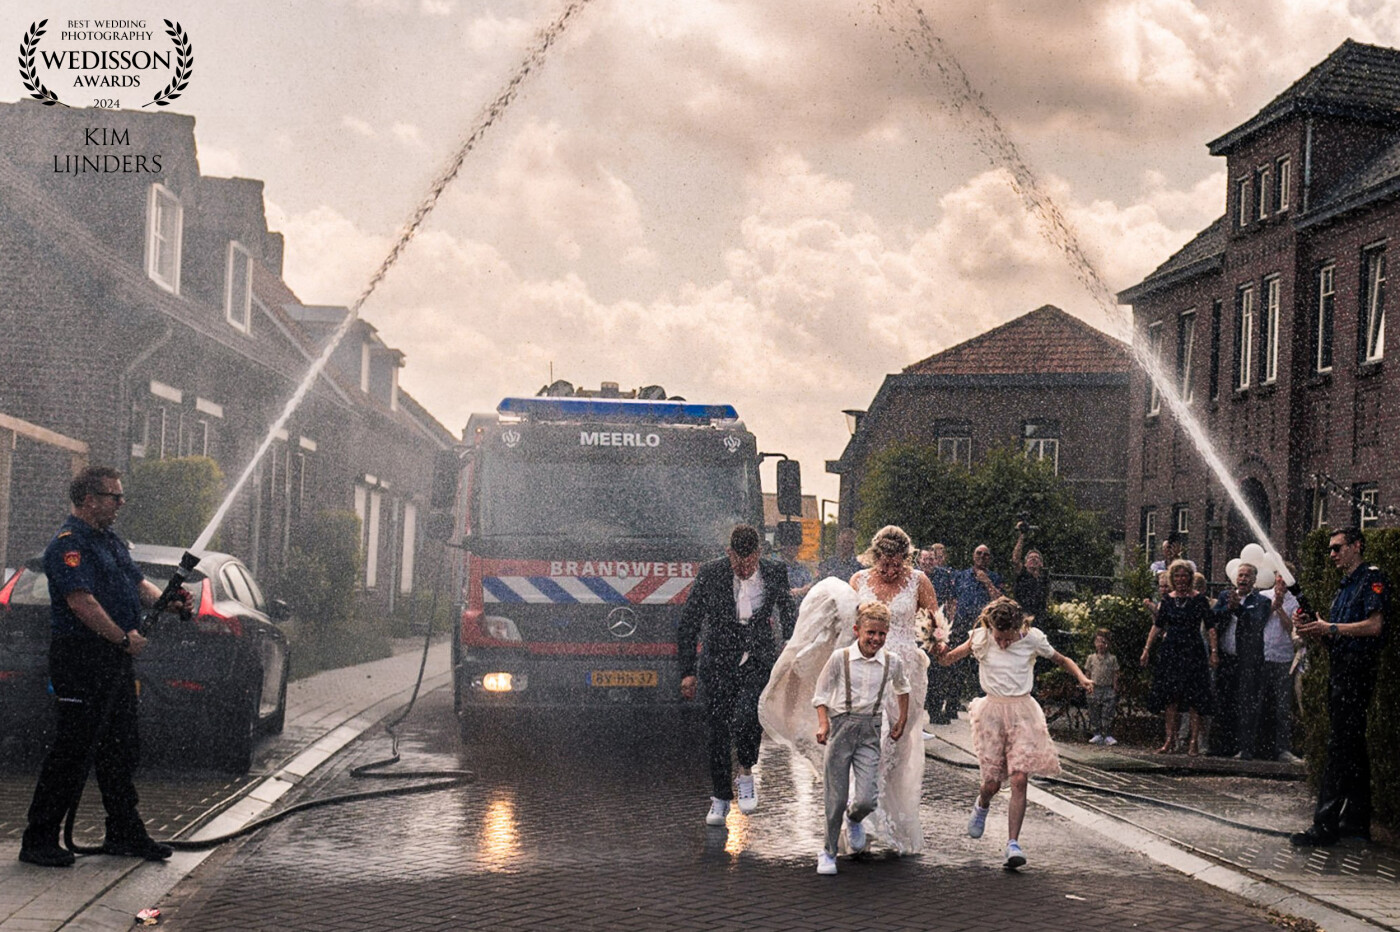 It is an old tradition that when a fireman gets married, the newlyweds have to run under the sprinkler immediately after the ceremony.